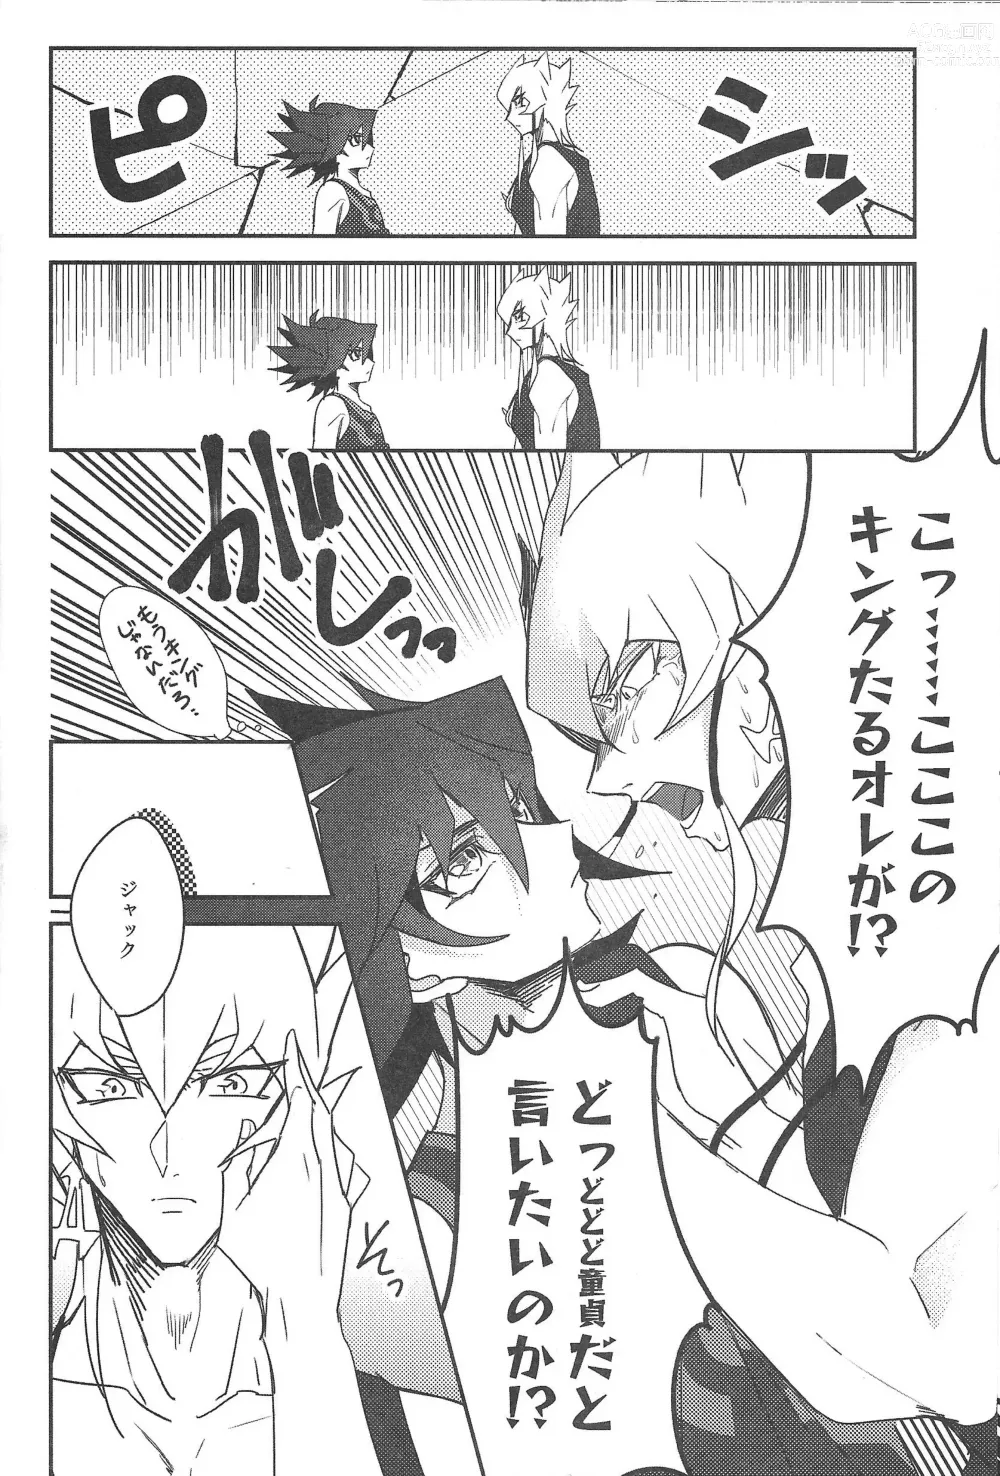 Page 13 of doujinshi Cherry, Virgin, Extra.